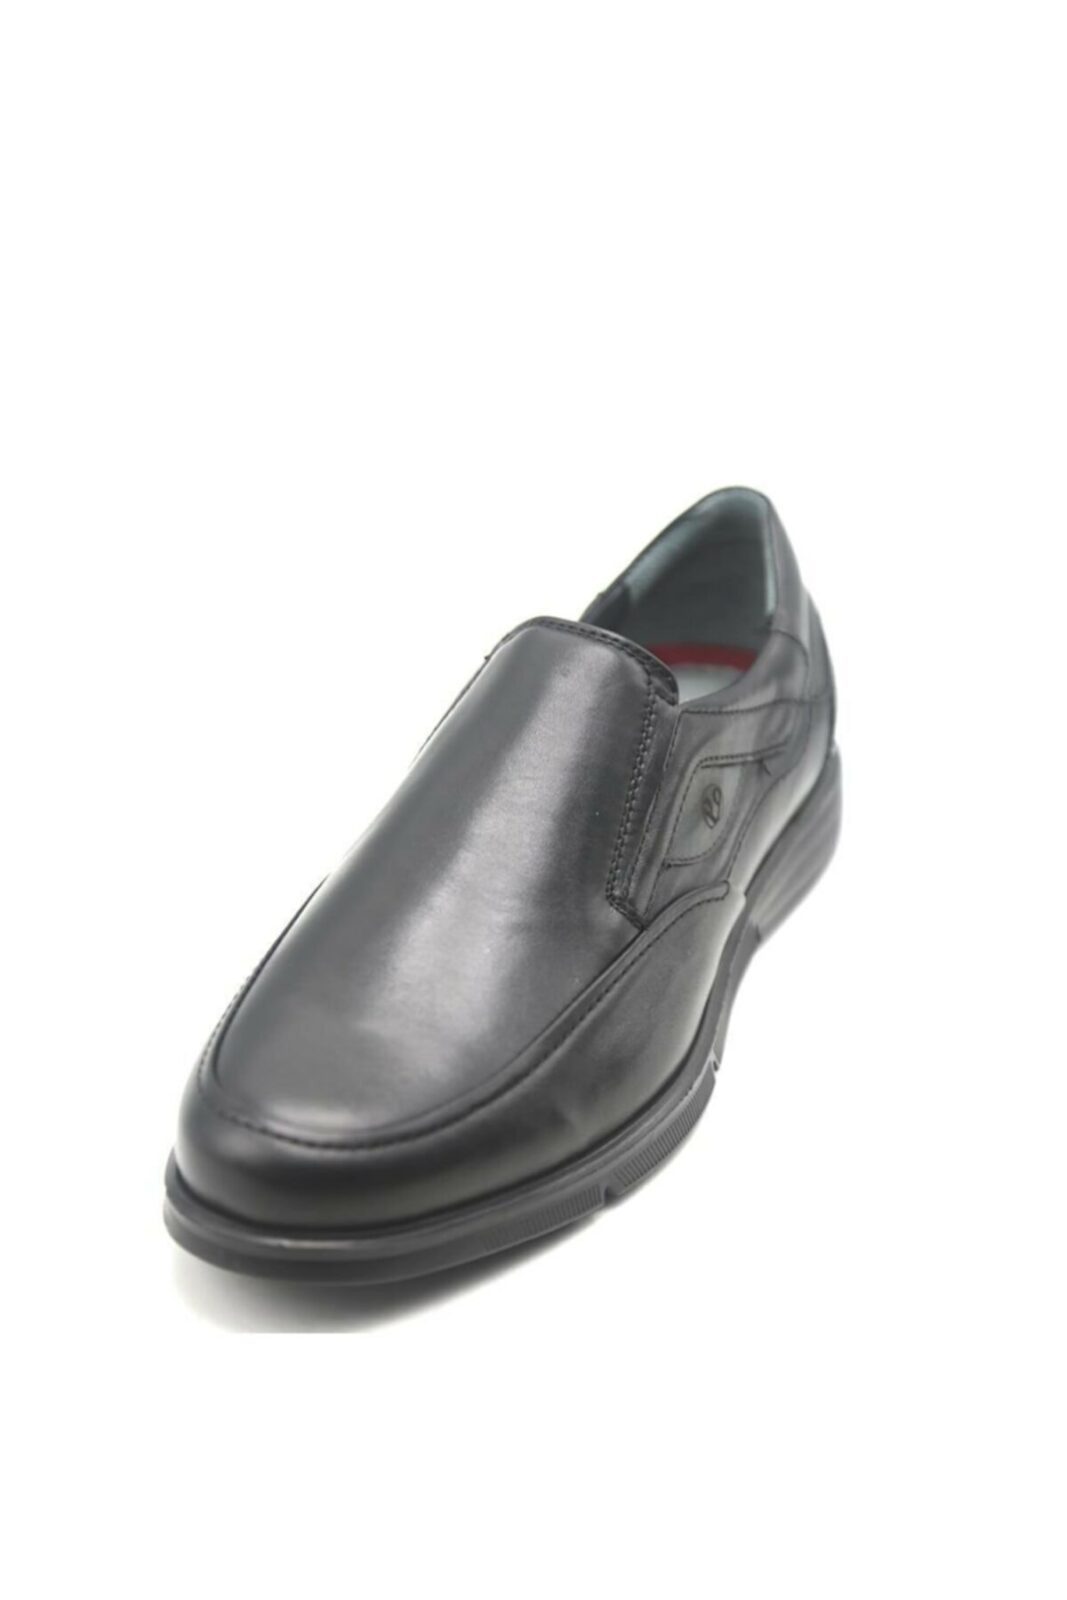 Forelli Business Shoes - Black